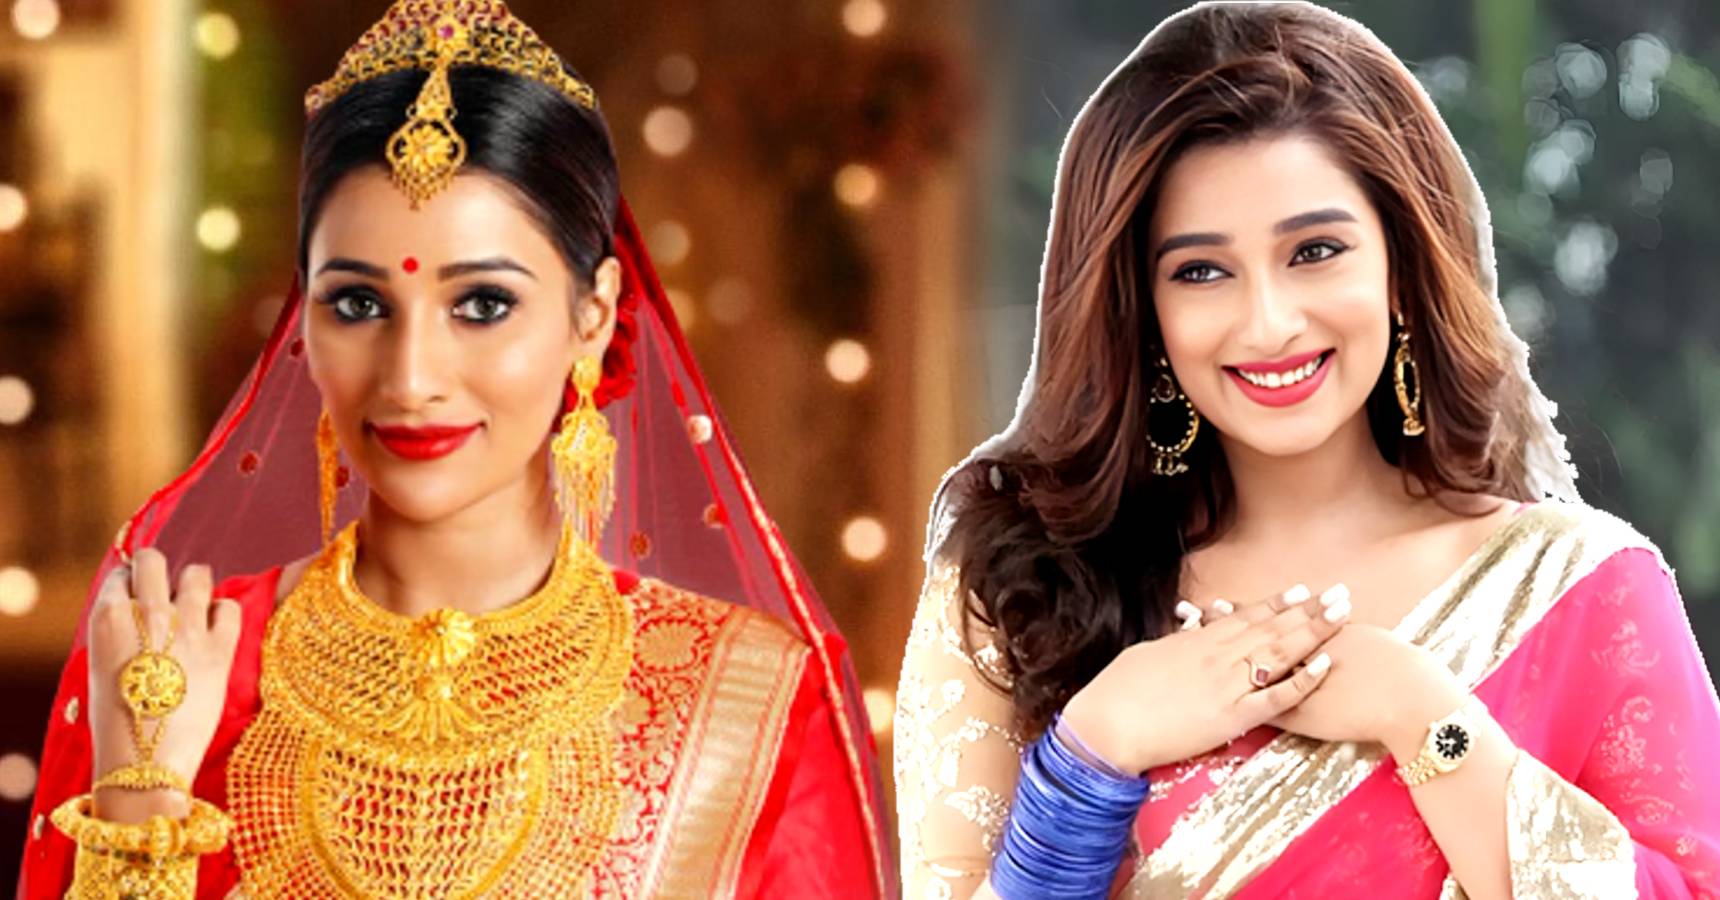 Tollywood actress Sayantika Banerjee opens up about her marriage planning